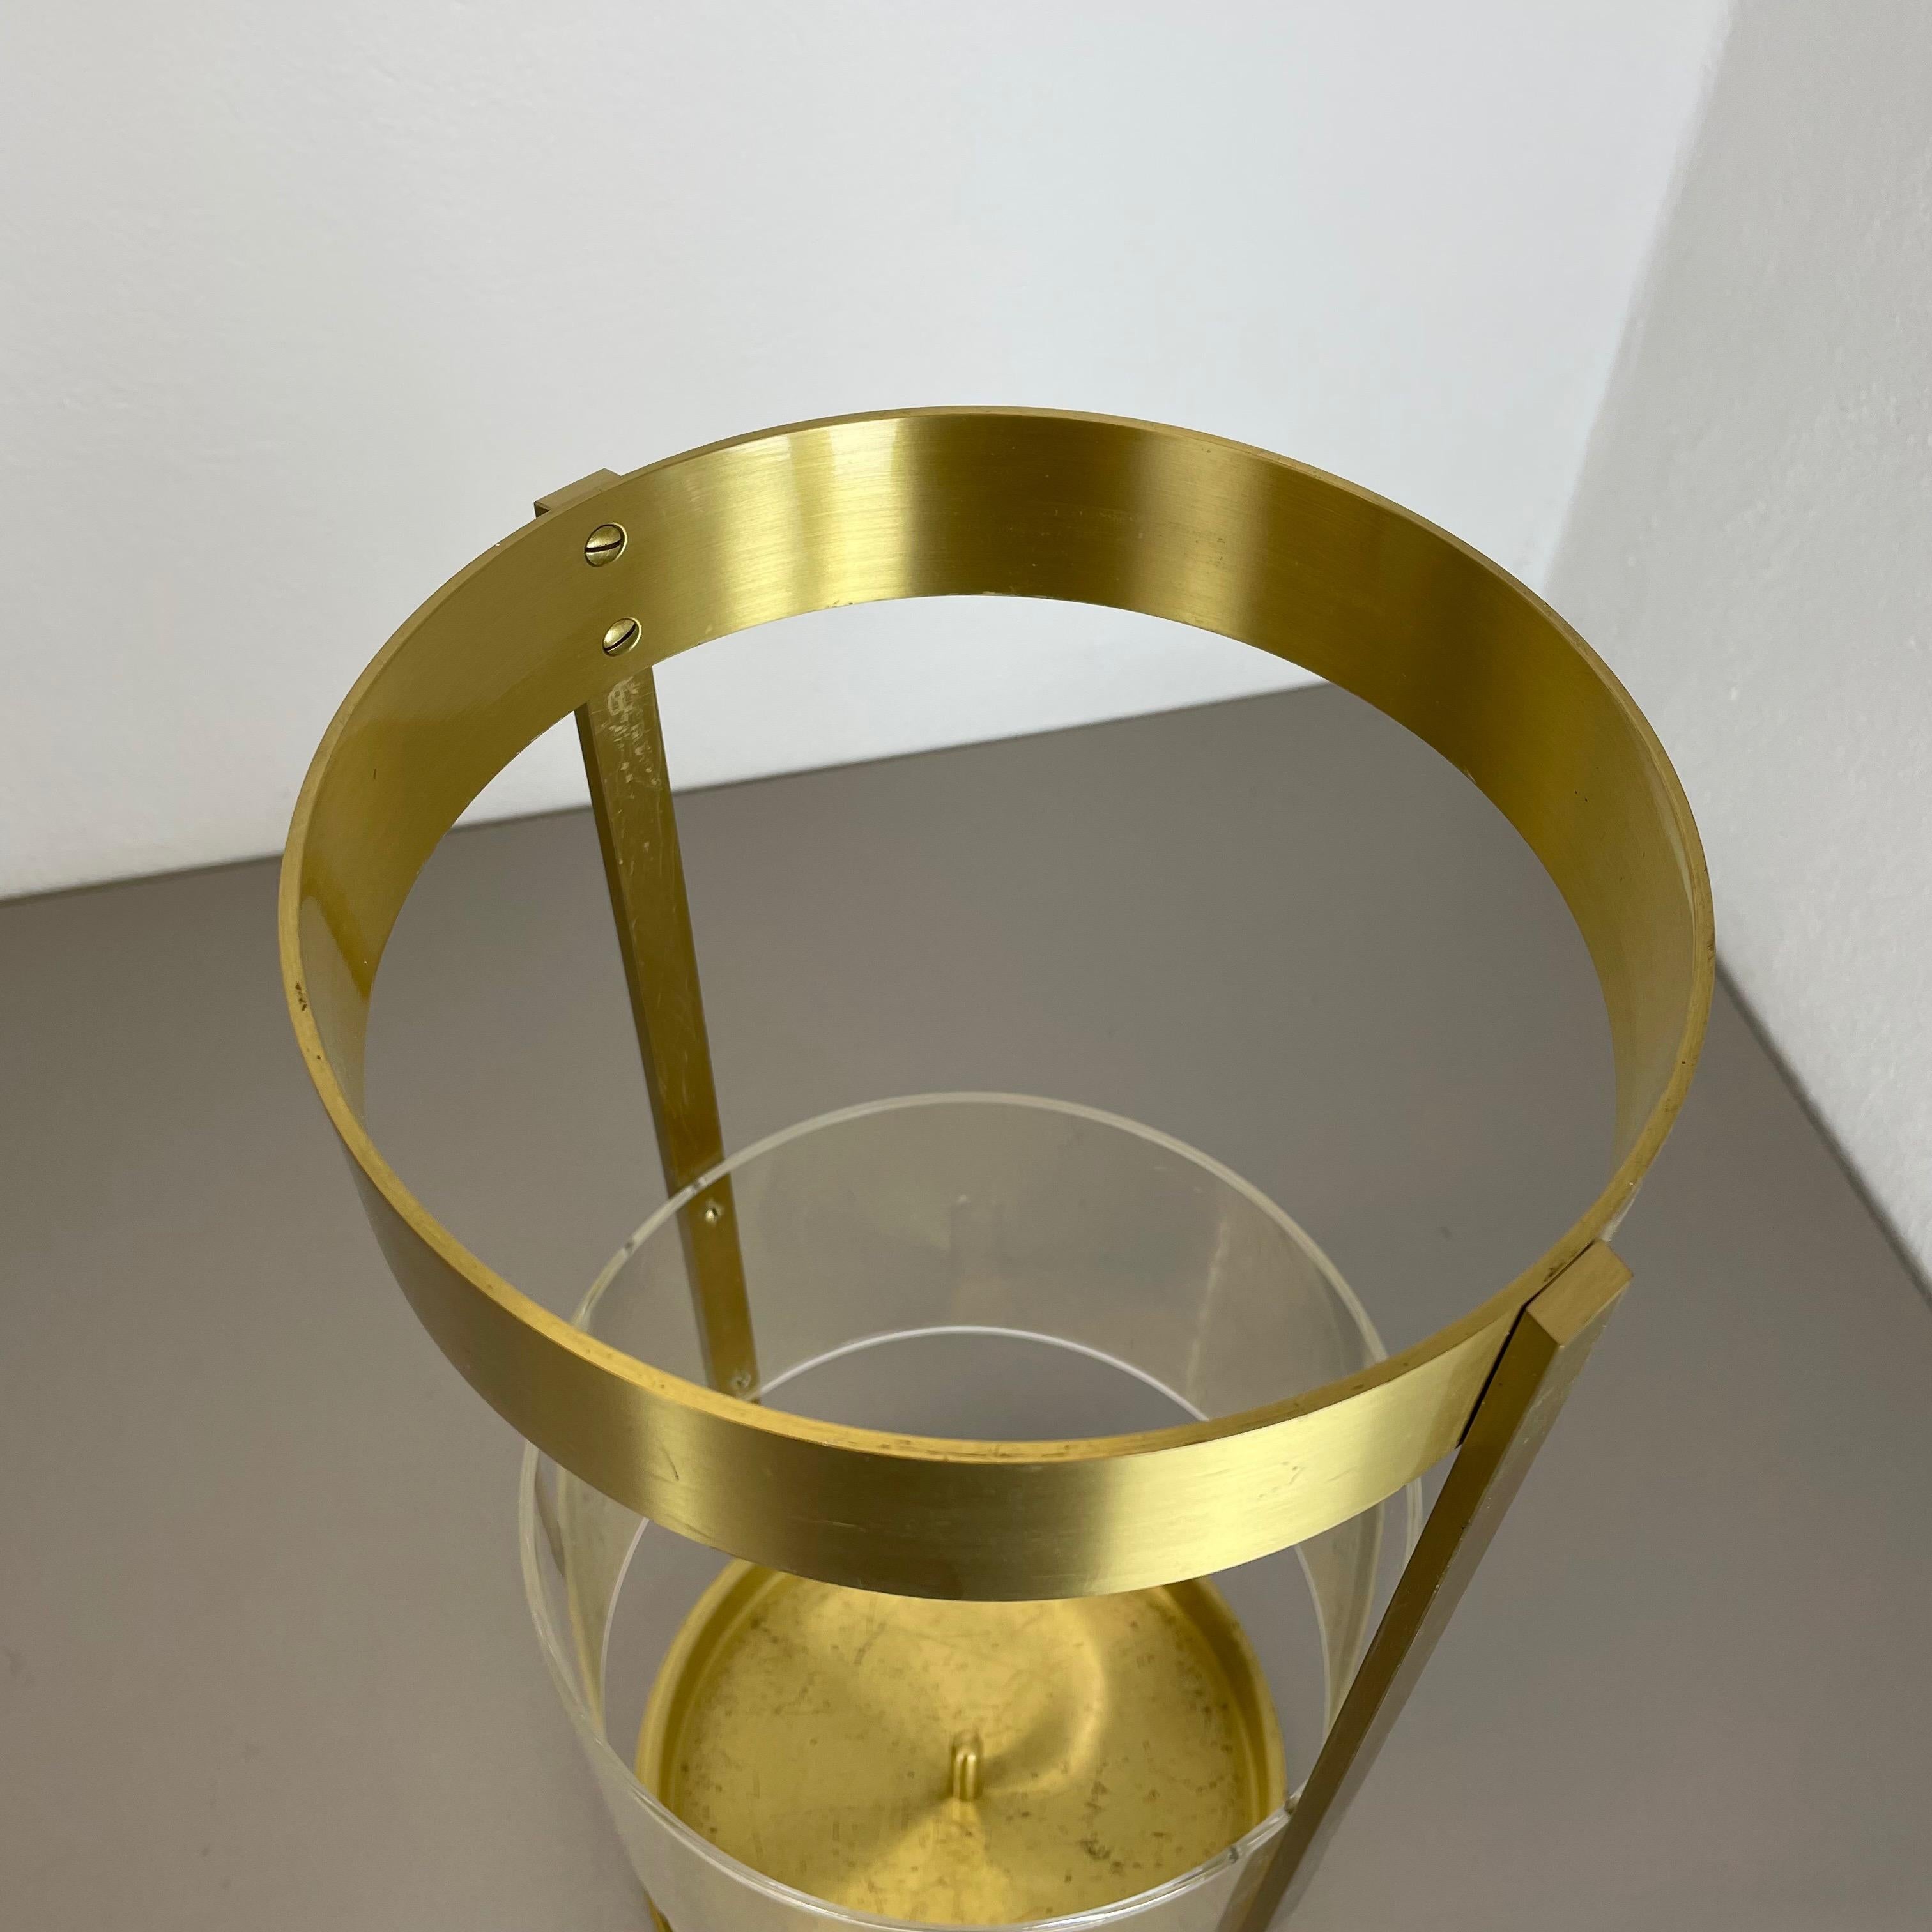 Original Hollywood Regency Solid Brass Acryl Glass Umbrella Stand, Italy, 1970s For Sale 7